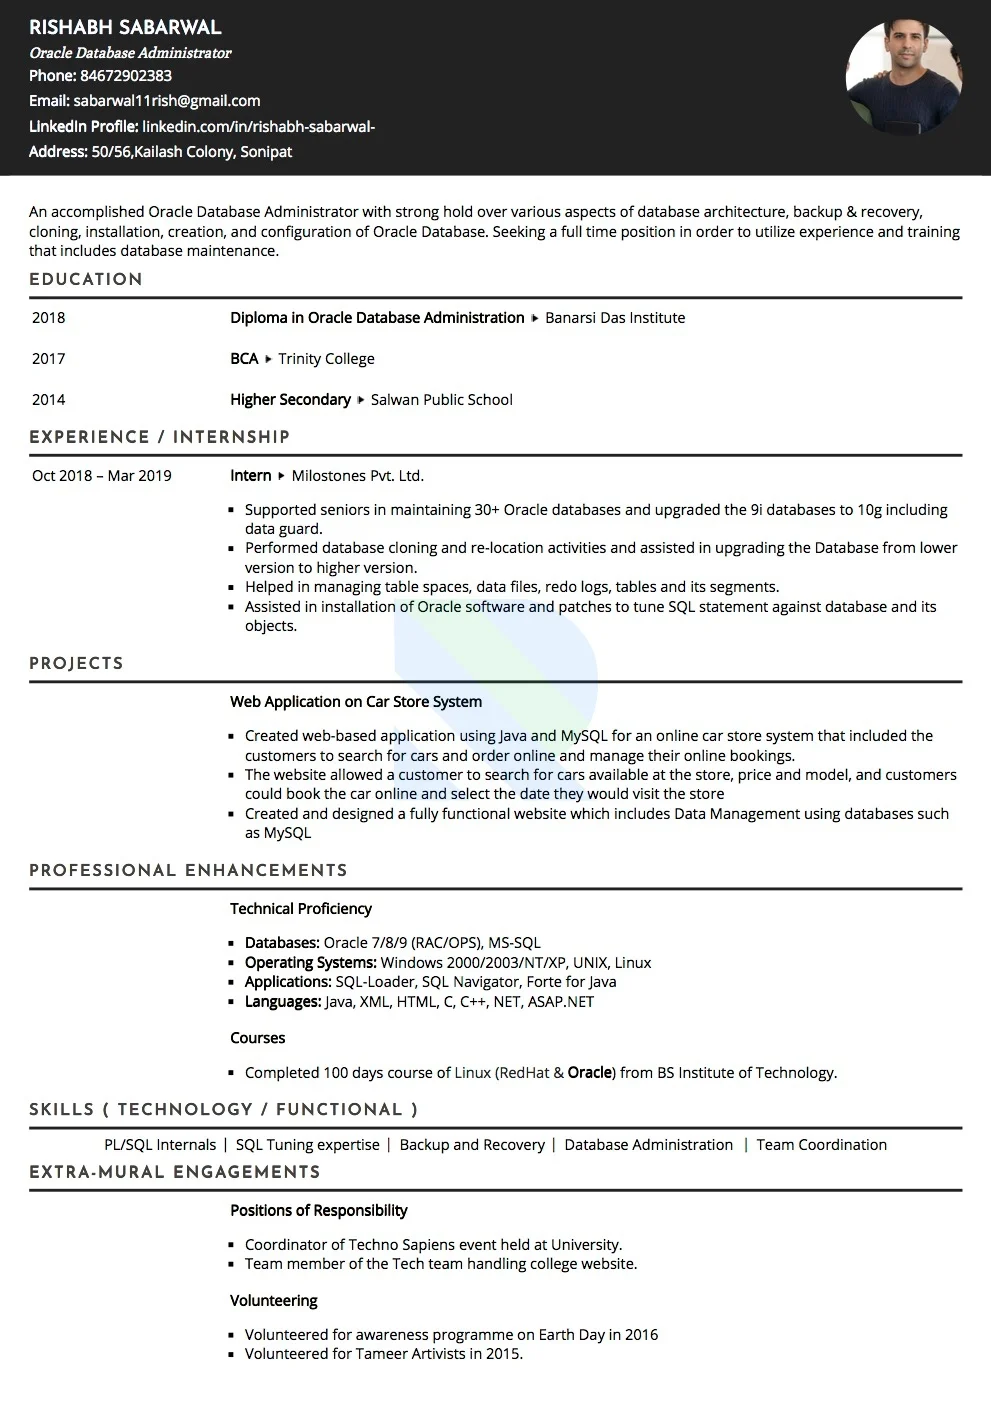 Sample Resume of Oracle DBA | Free Resume Templates & Samples on Resumod.co